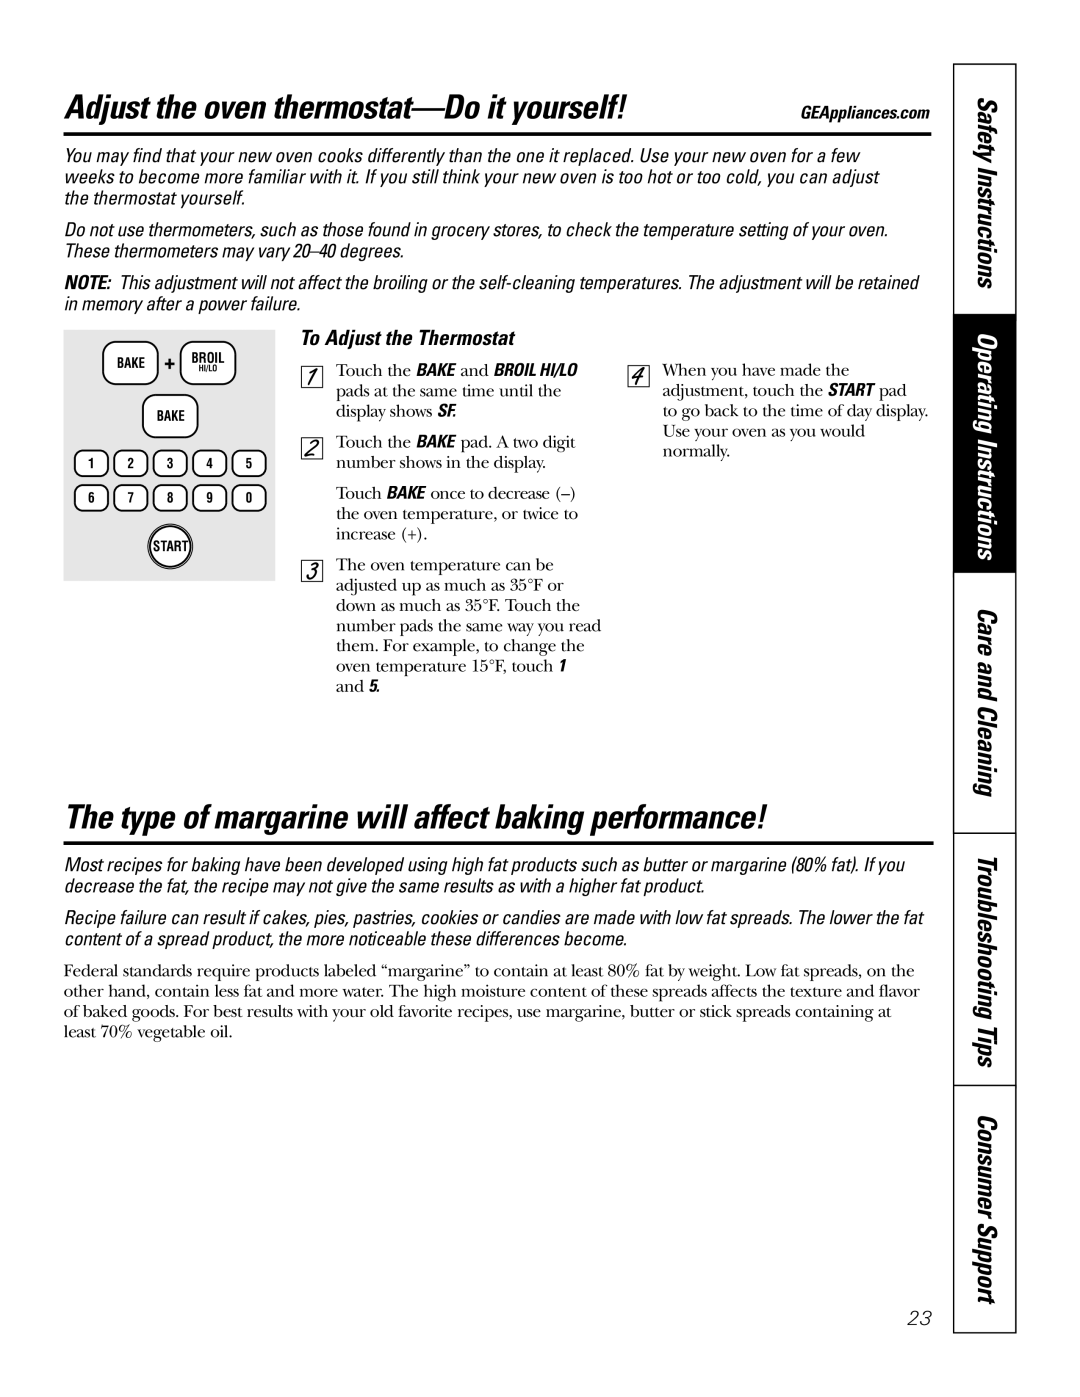 GE JBP84 owner manual Adjust the oven thermostat-Doit yourself, Safety Instructions, To Adjust the Thermostat 